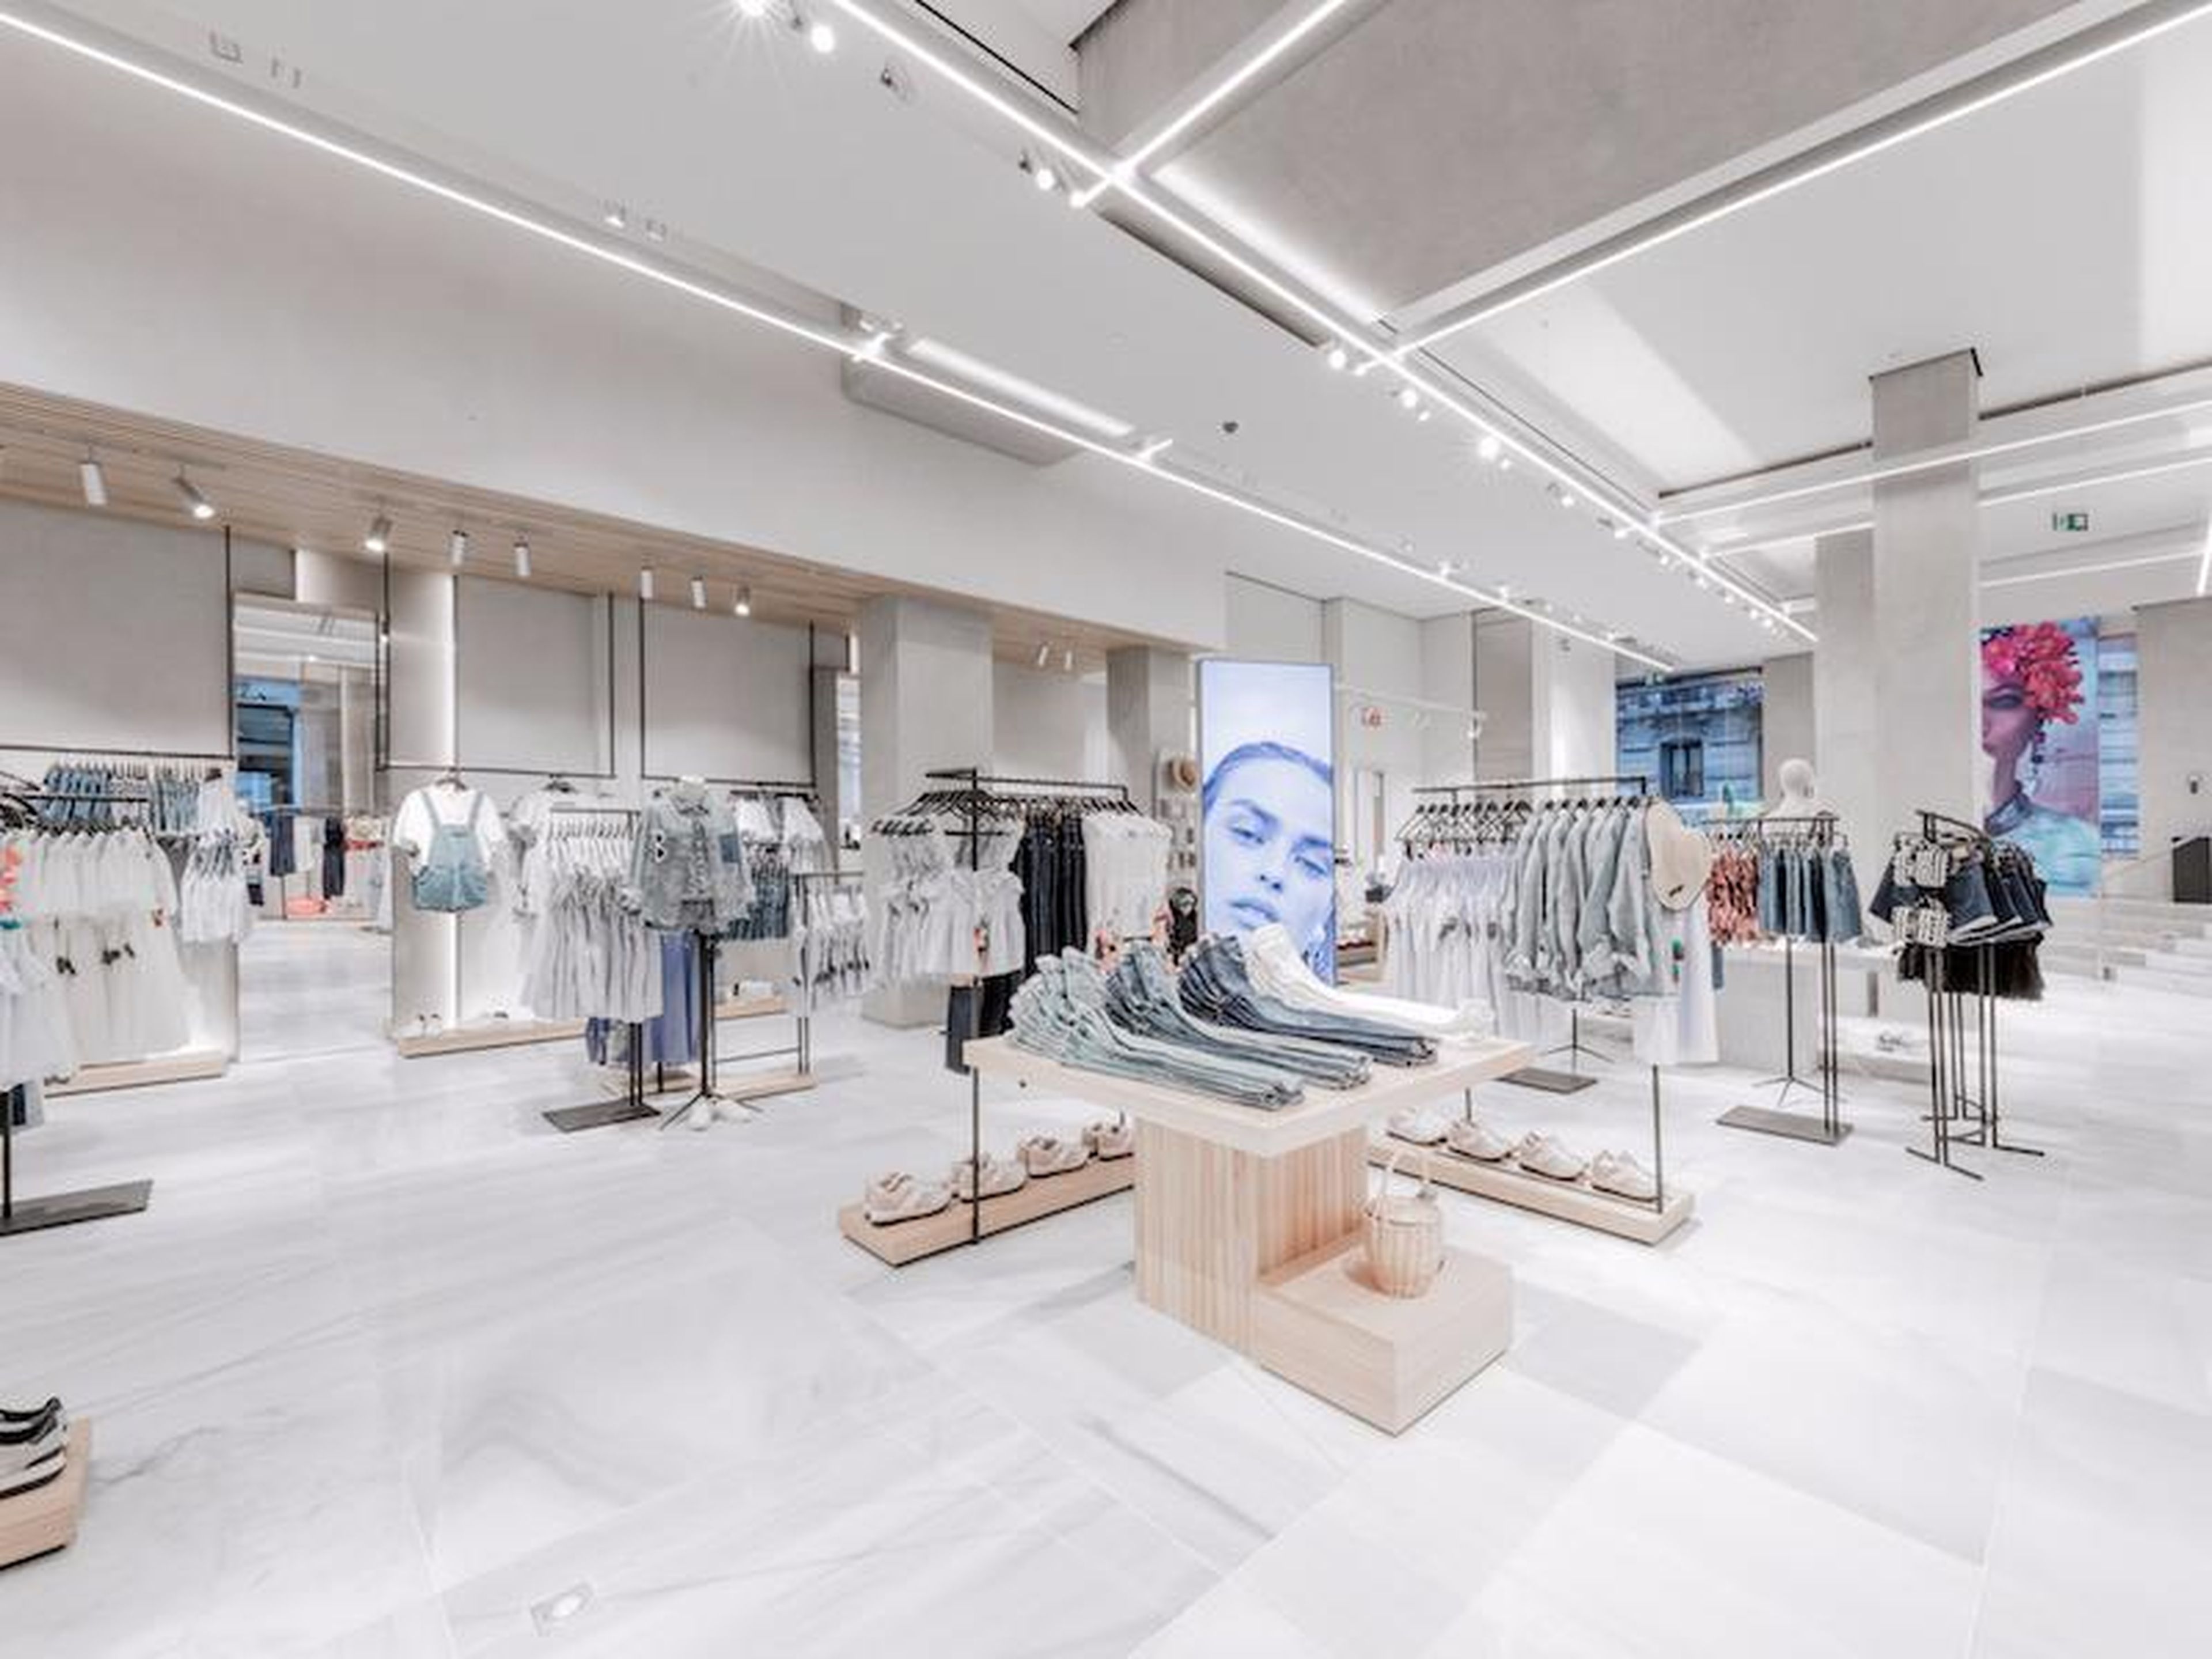 An example of Zara's store layout in one of its stores in Bilbao, Spain.